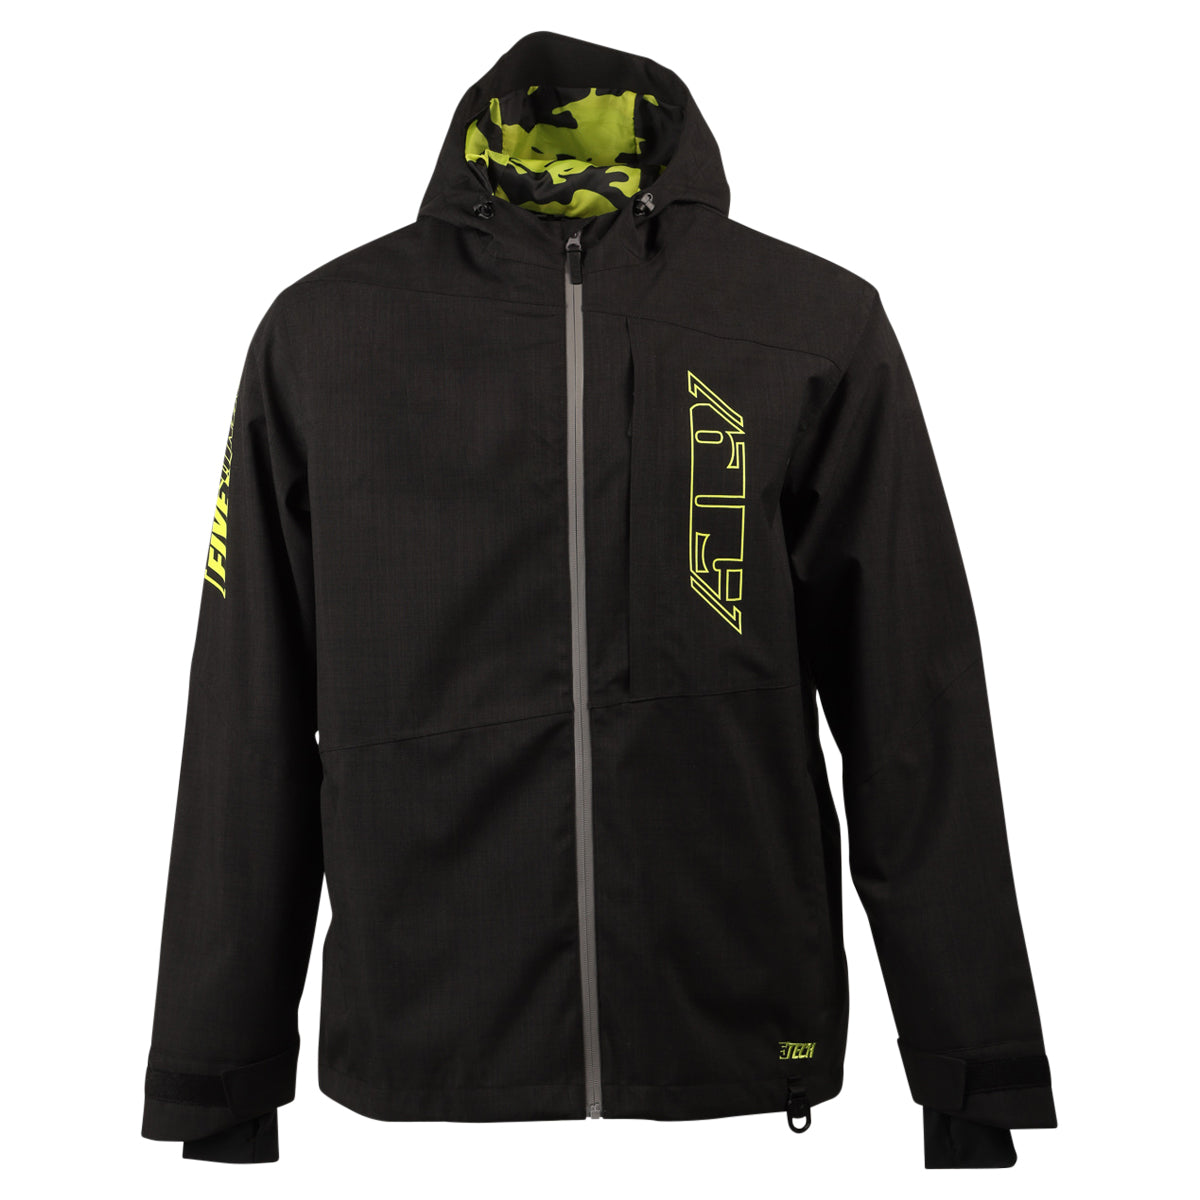 Forge Insulated Jacket - Covert Camo / XS